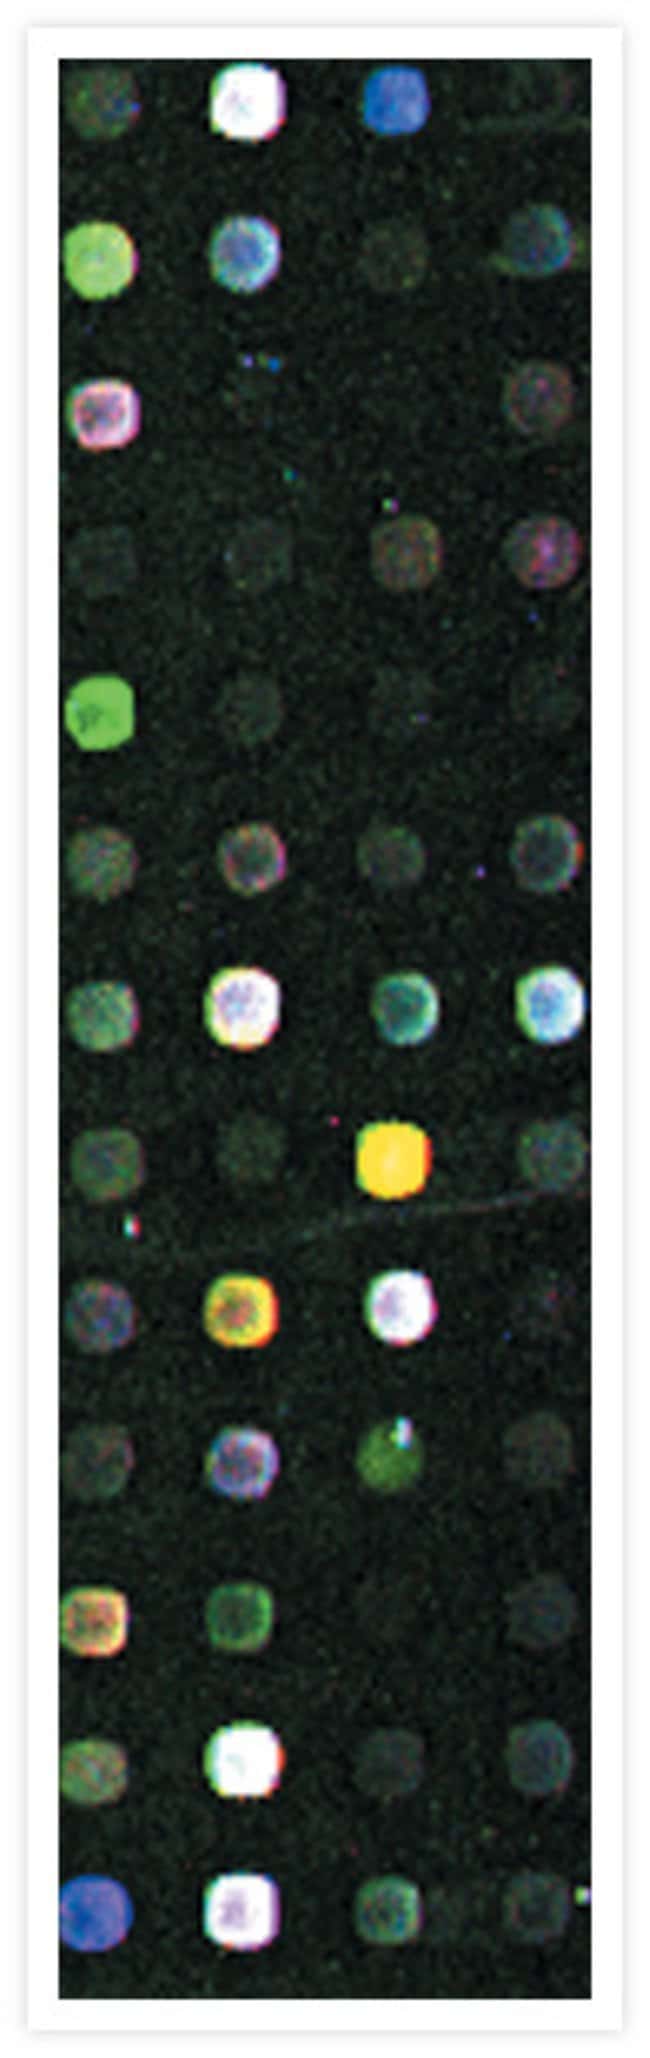 A cDNA microarray hybridized with three different cDNA samples labeled using our ARES™ DNA Labeling Kits.